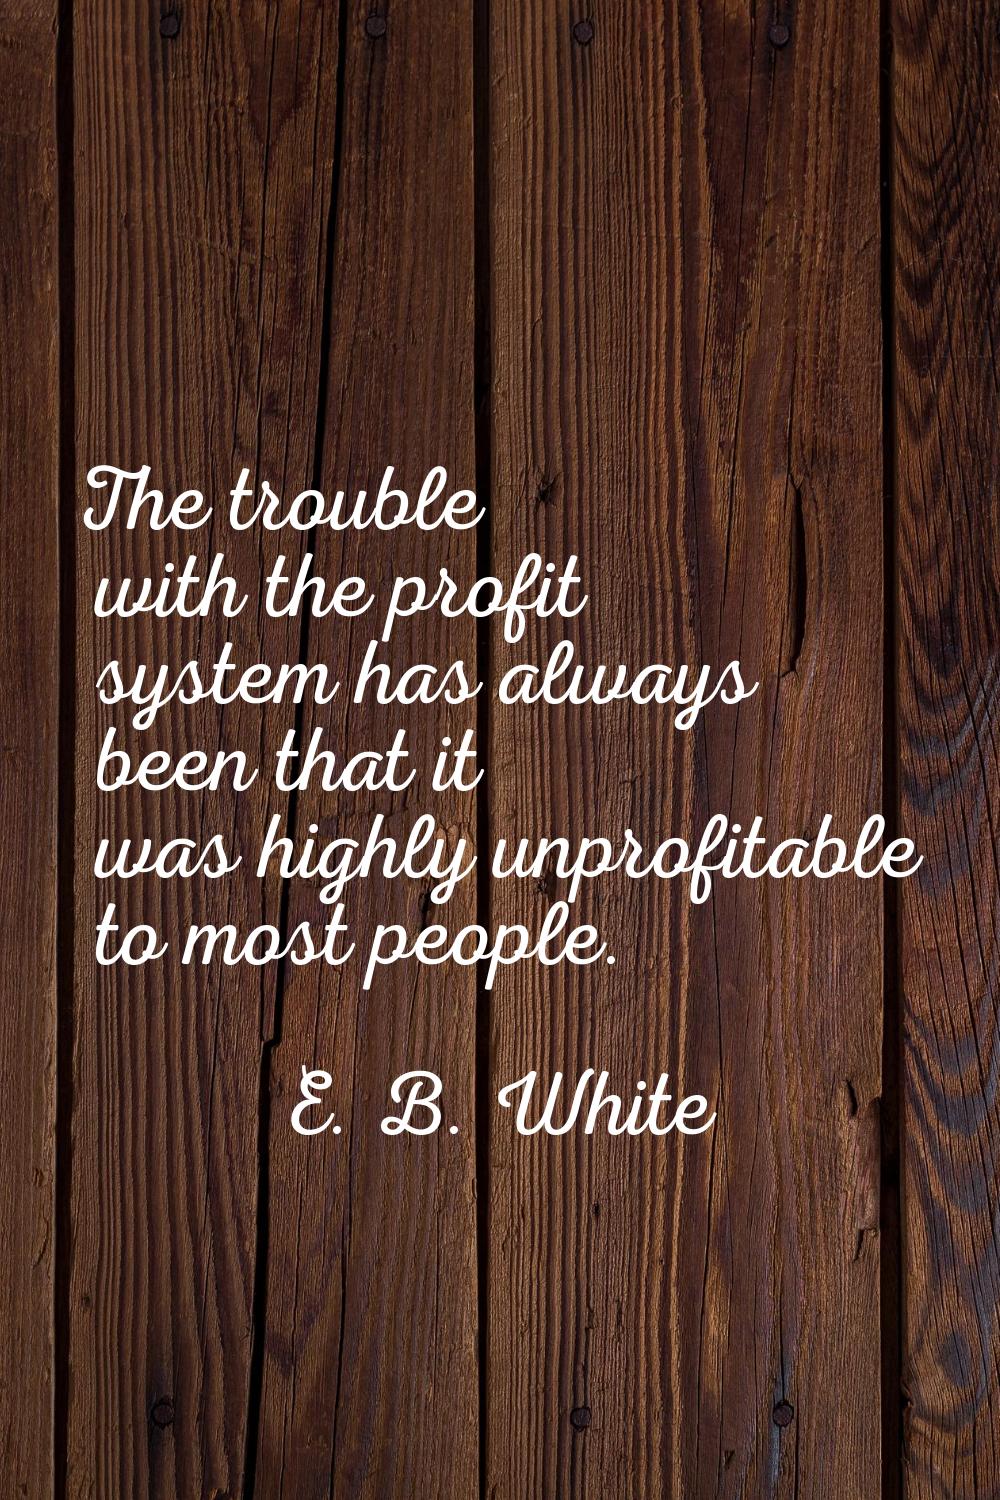 The trouble with the profit system has always been that it was highly unprofitable to most people.